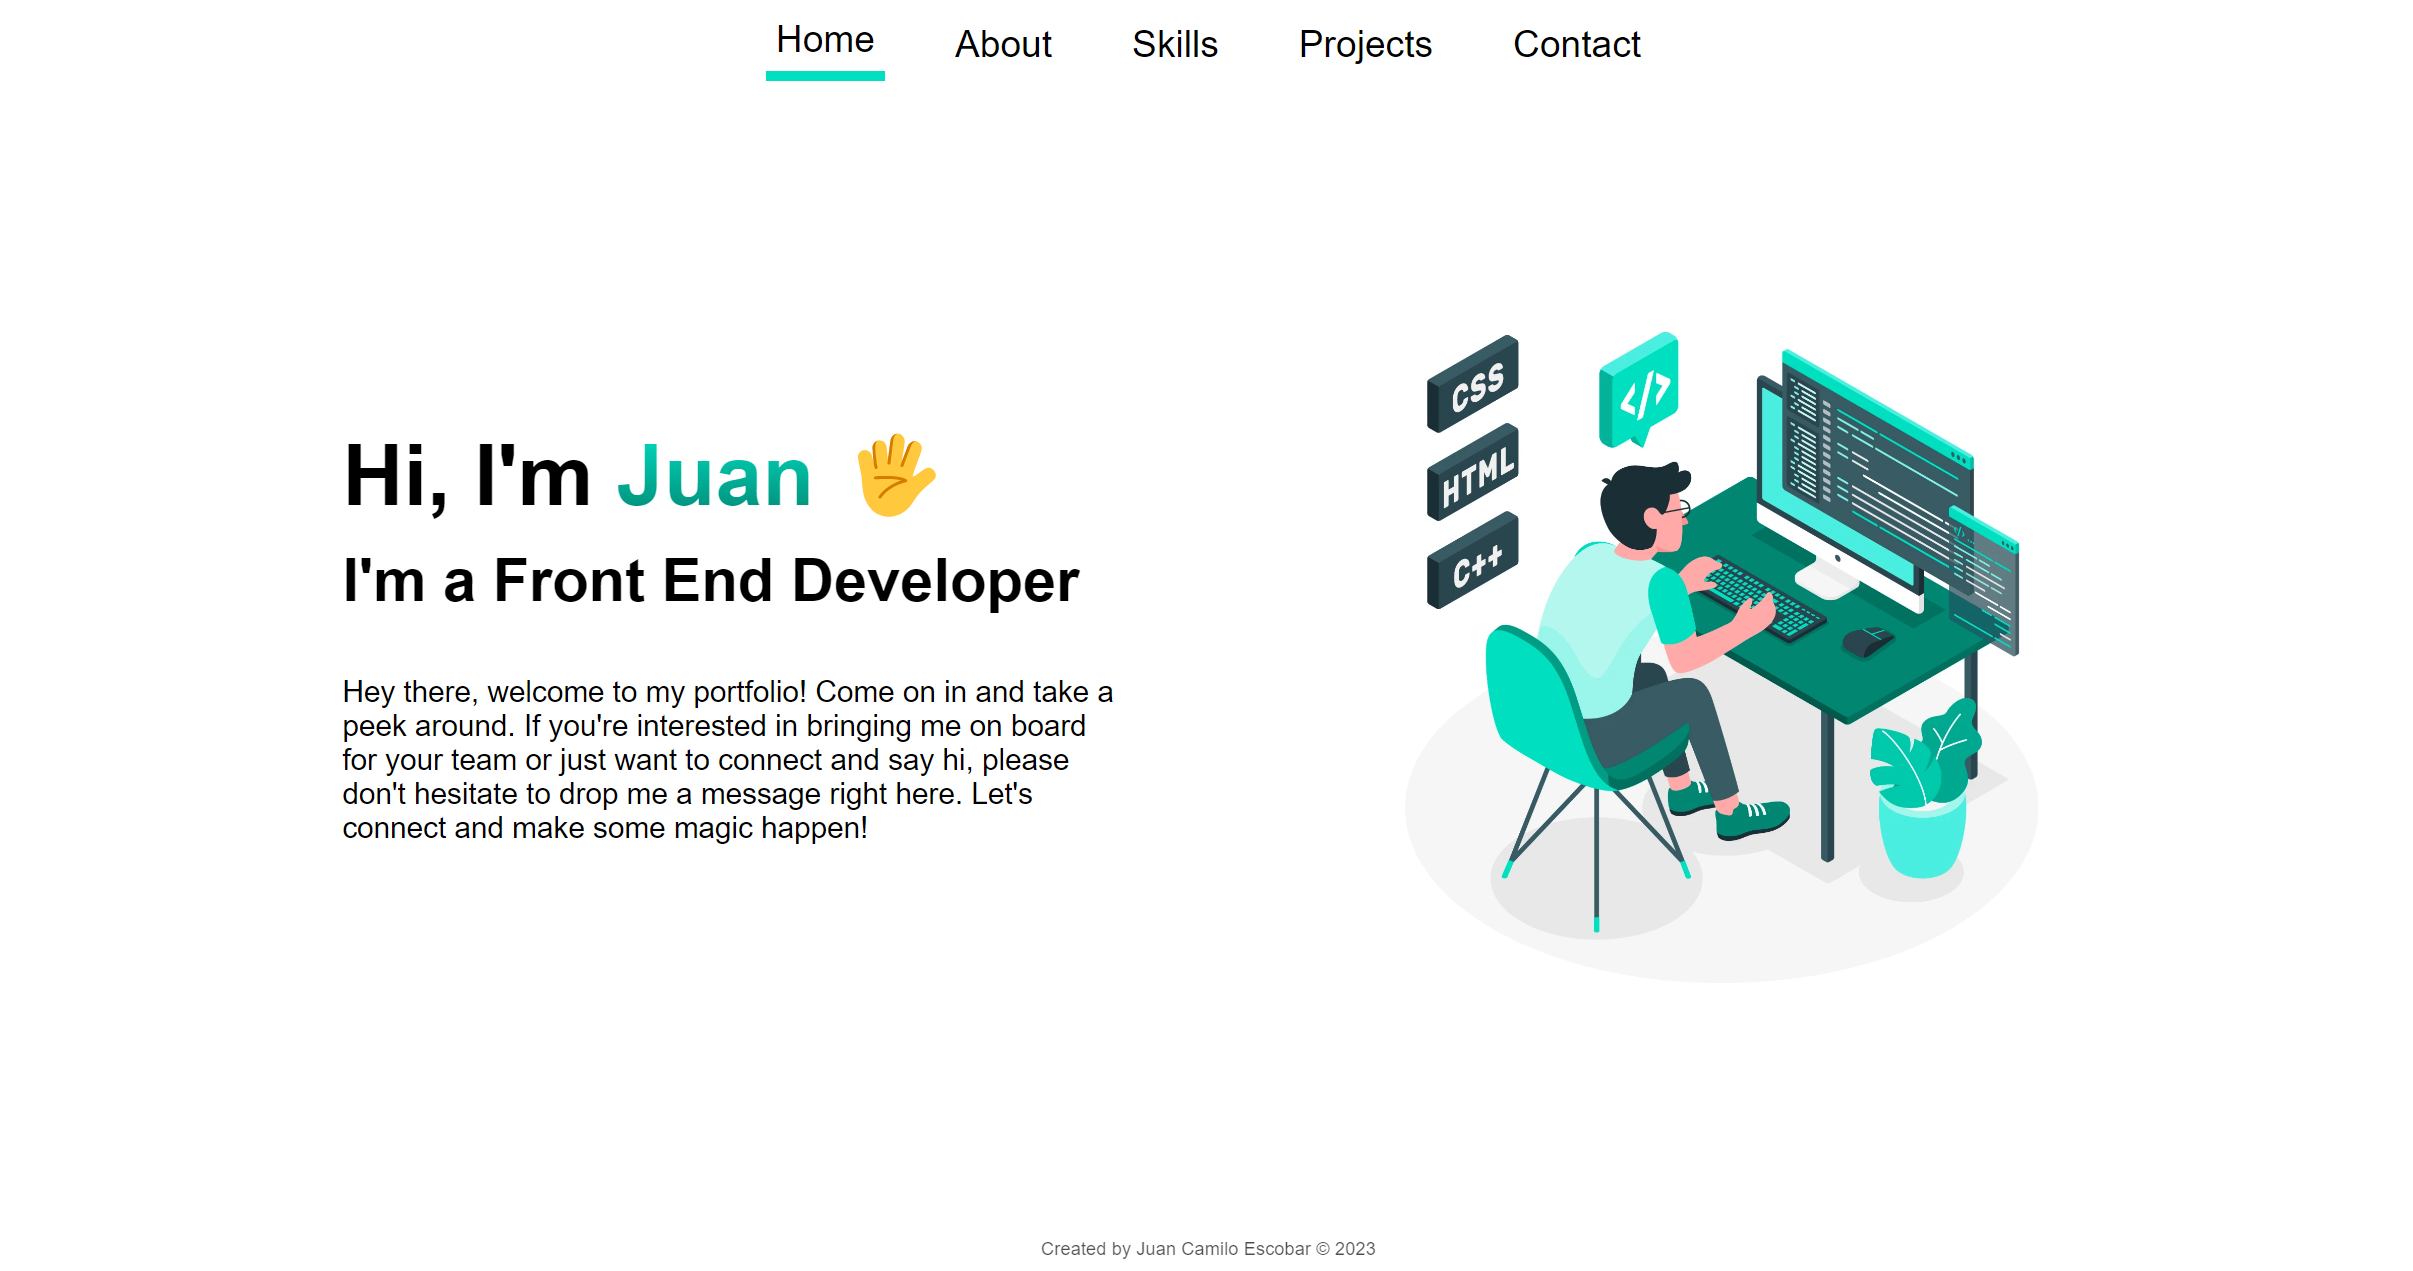 Home About Skills Projects Contact

 

Hi, I'm Juan &amp;
I'm a Front End Developer &amp;

Hey there, welcome to my portfolio! Come on in and take a
peek around. If you're interested in bringing me on board
for your team or just want to connect and say hi, please
don't hesitate to drop me a message right here. Let's
connect and make some magic happen!

 

 

san Camilo Escobar